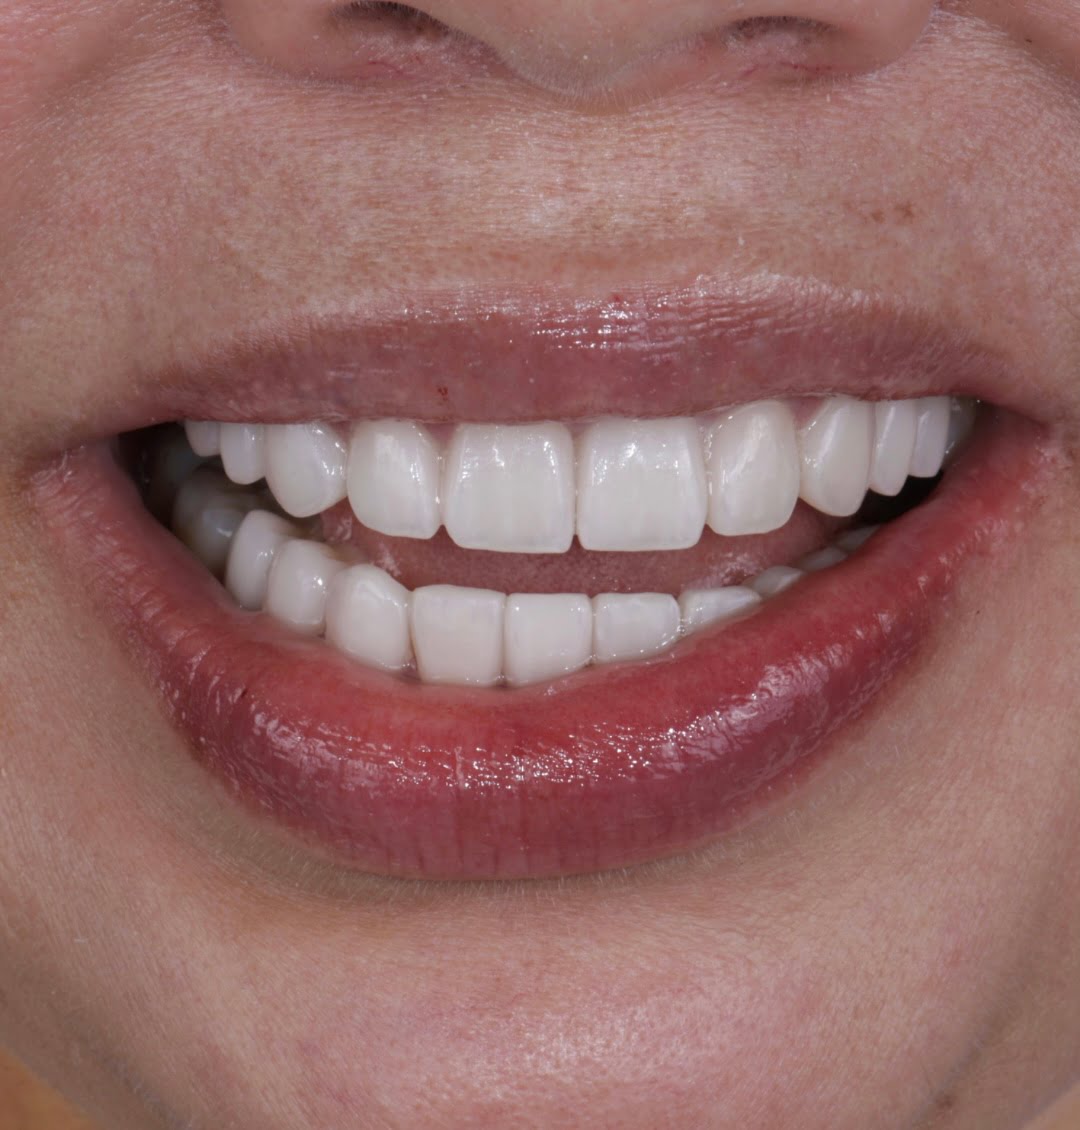 CASE REVIEW: OLD COMPOSITES TO PORCELAIN VENEERS